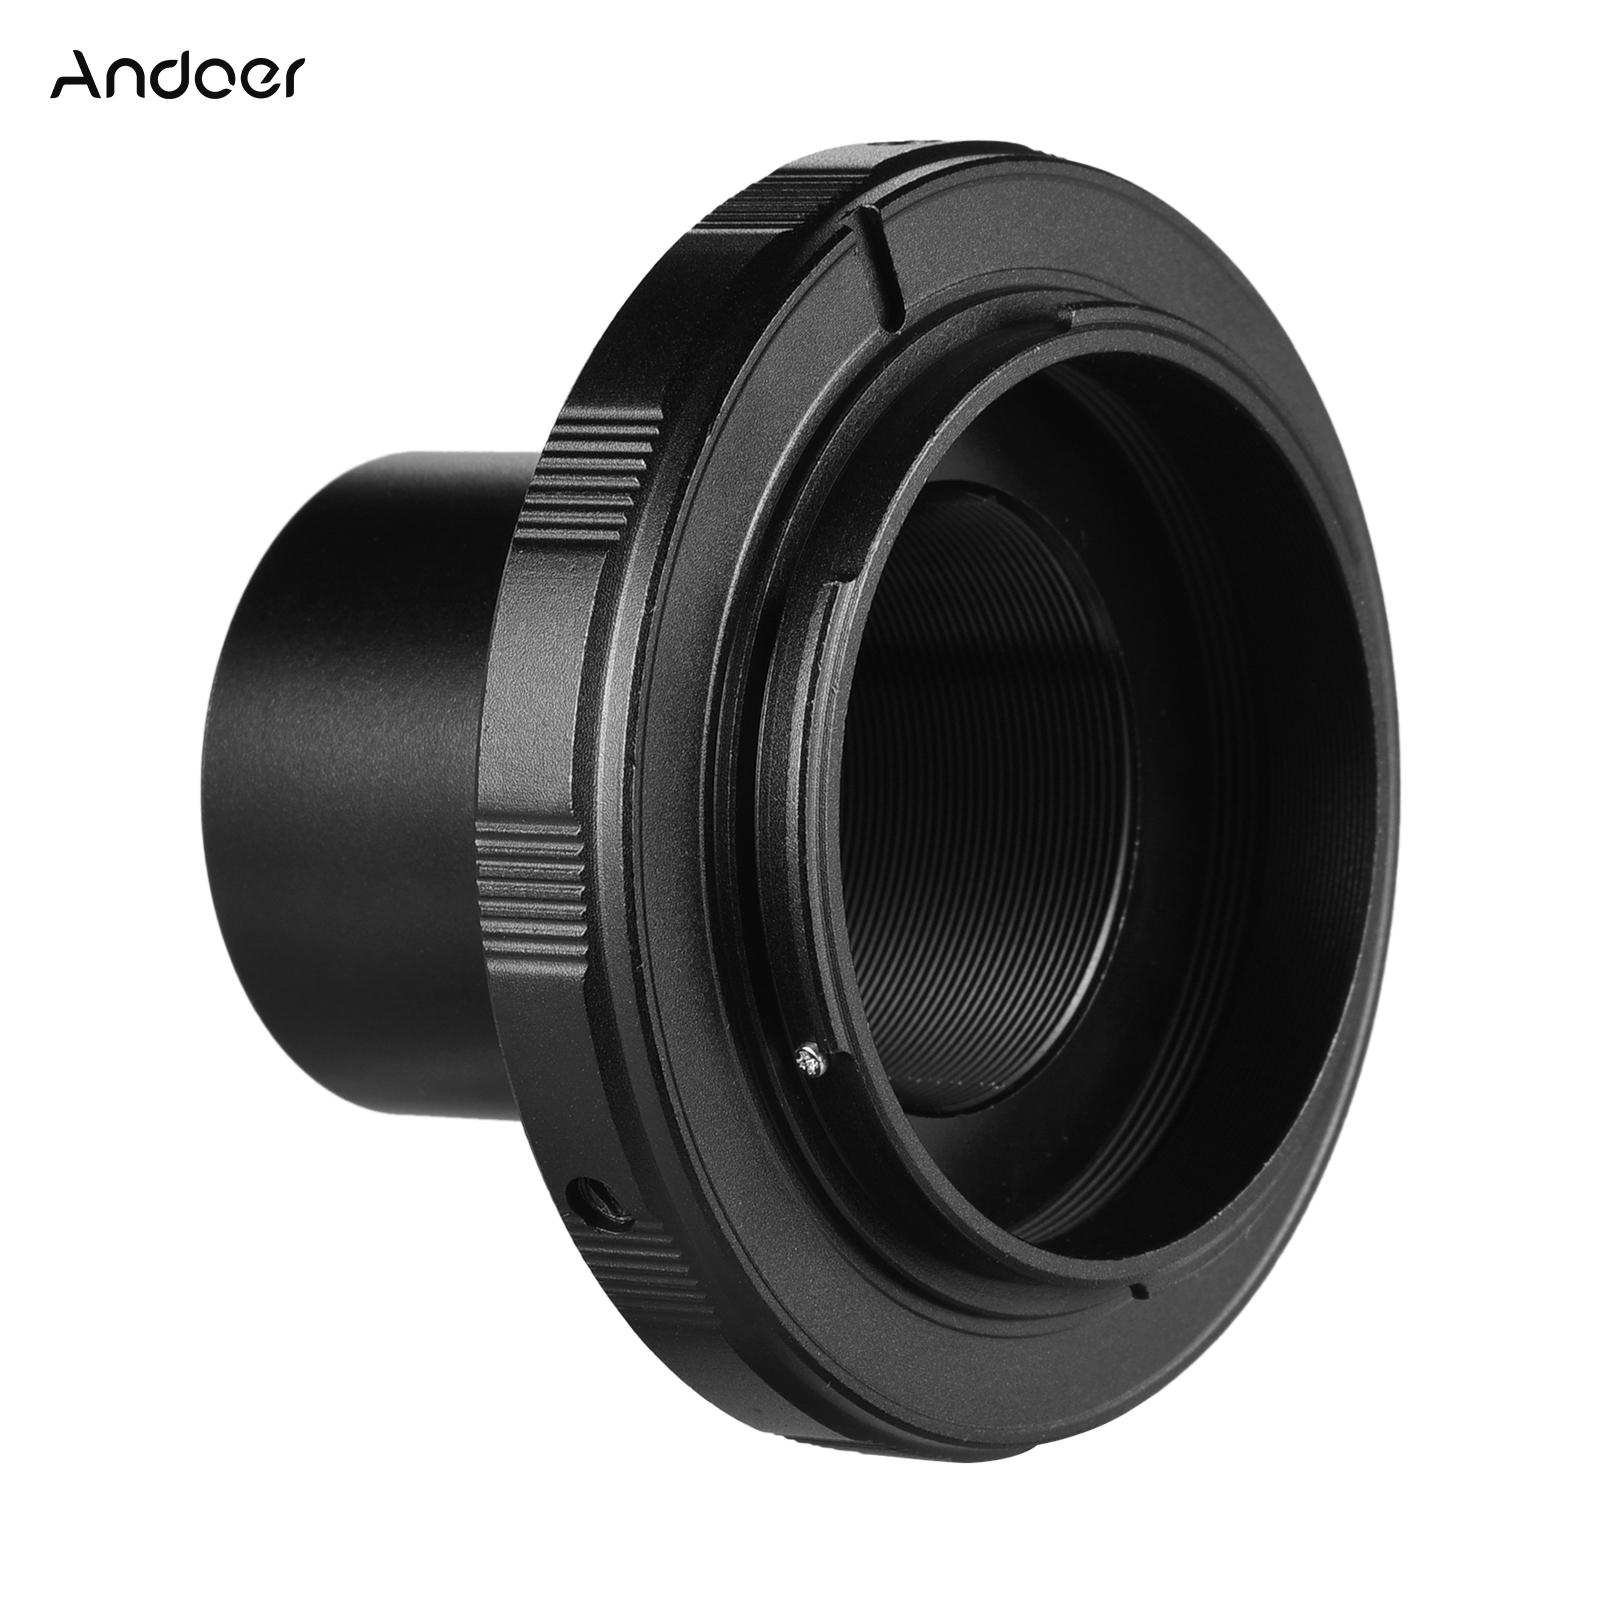 Andoer Camera Telescope Adapter Ring Photography Accessory Replacement for Nikon Camera 1.25 Inch